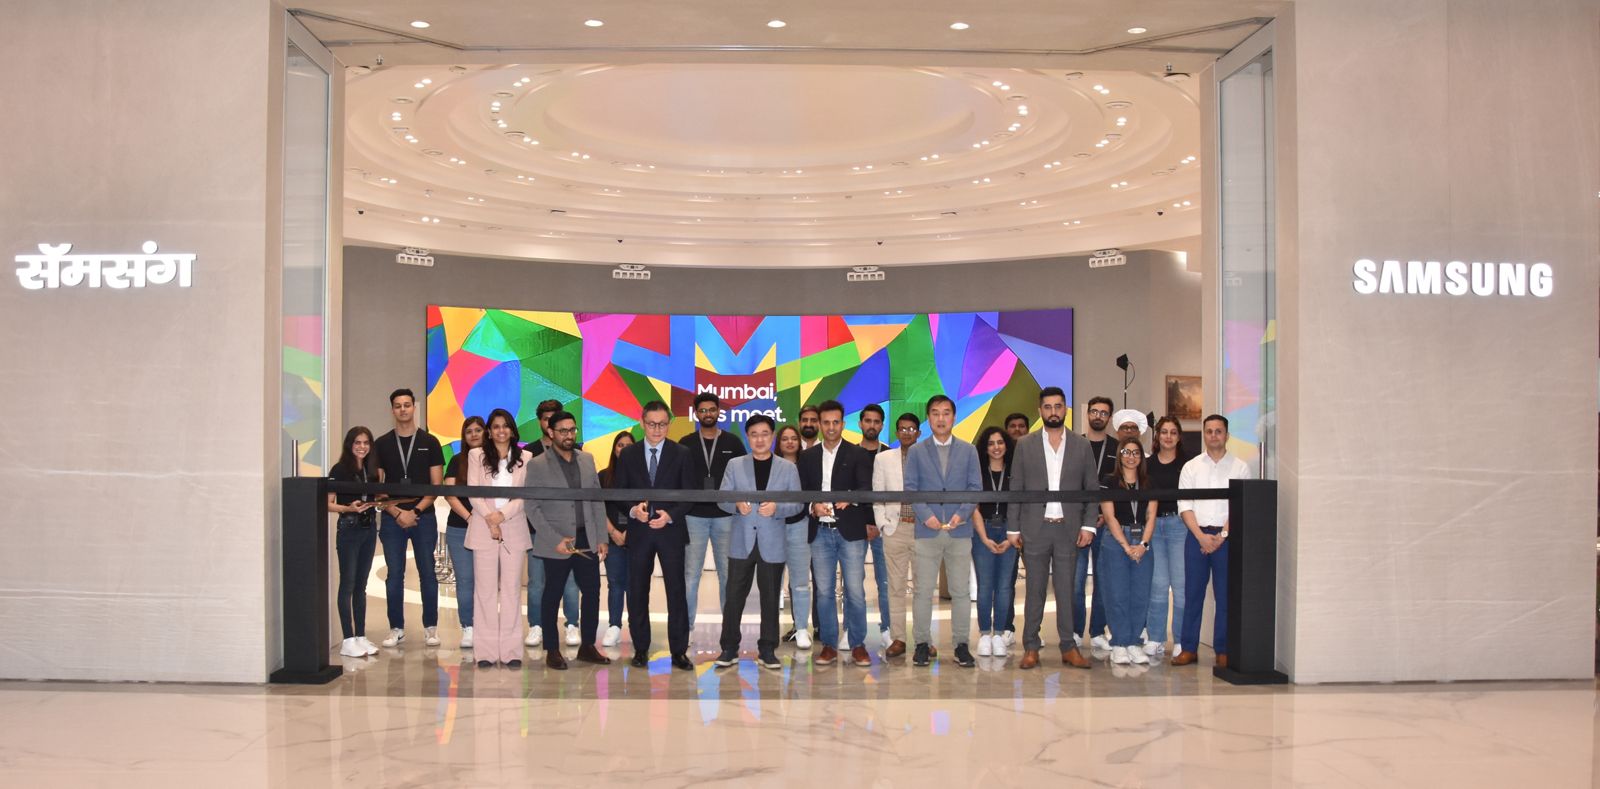 Samsung BKC Lifestyle Experience Store Opens Doors  at Jio World Plaza